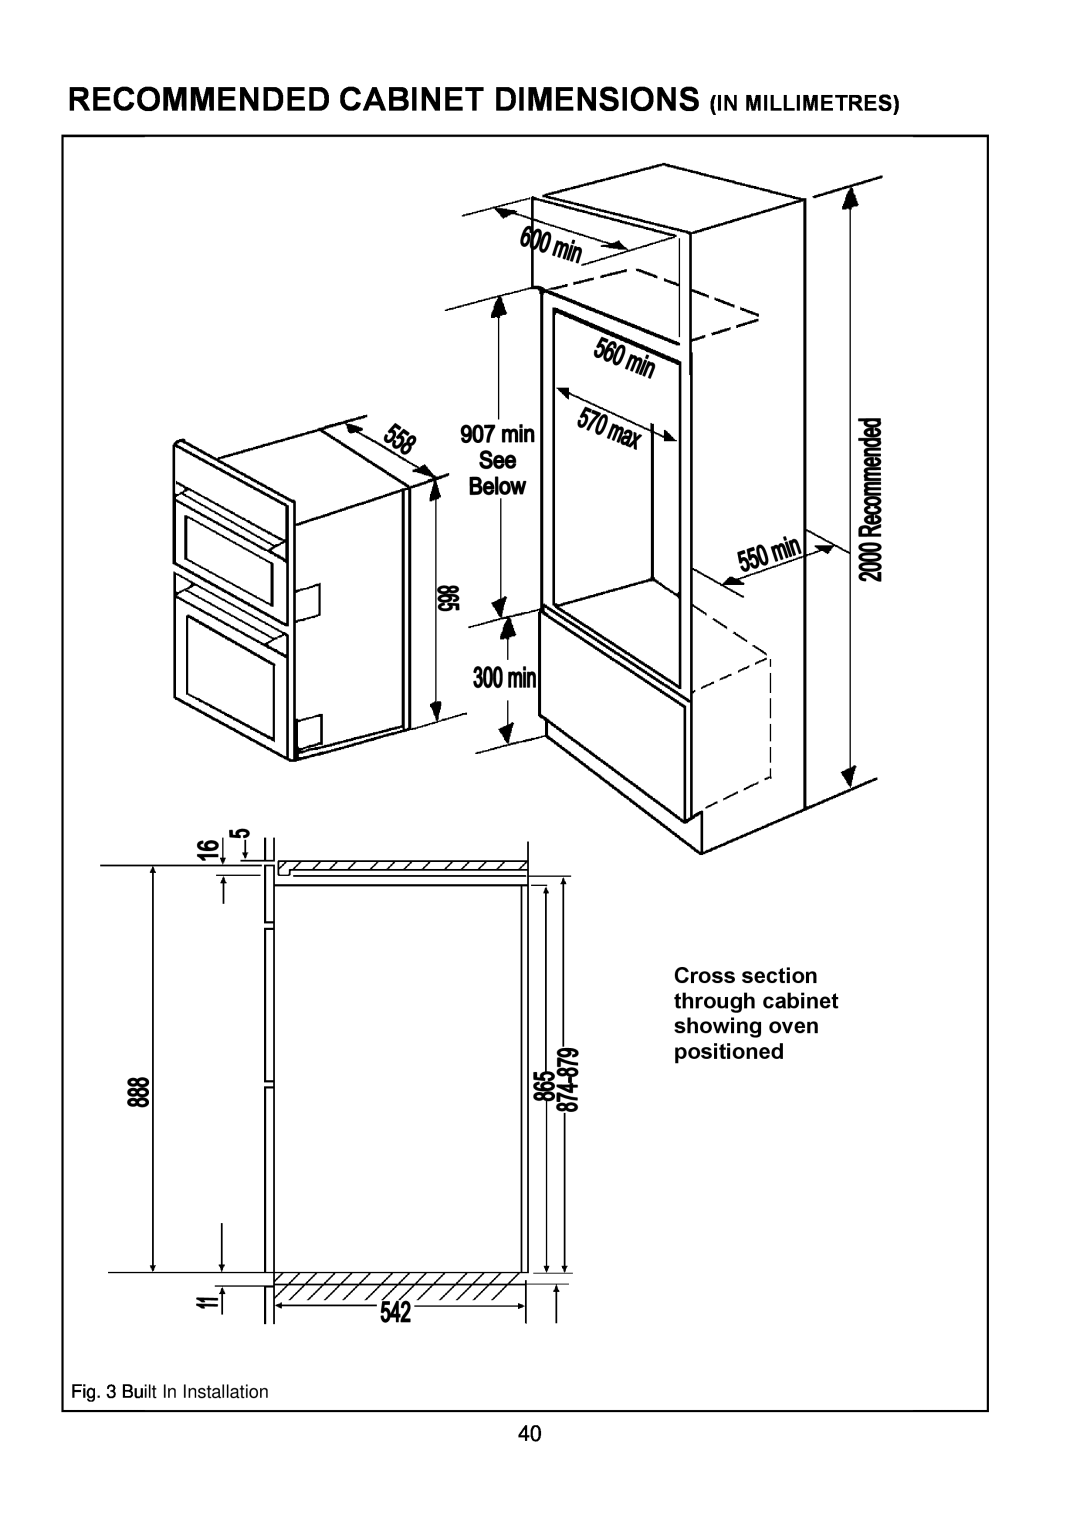 Electrolux D4101-5 Recommended Cabinet Dimensions In Millimetres, Cross section through cabinet showing oven positioned 